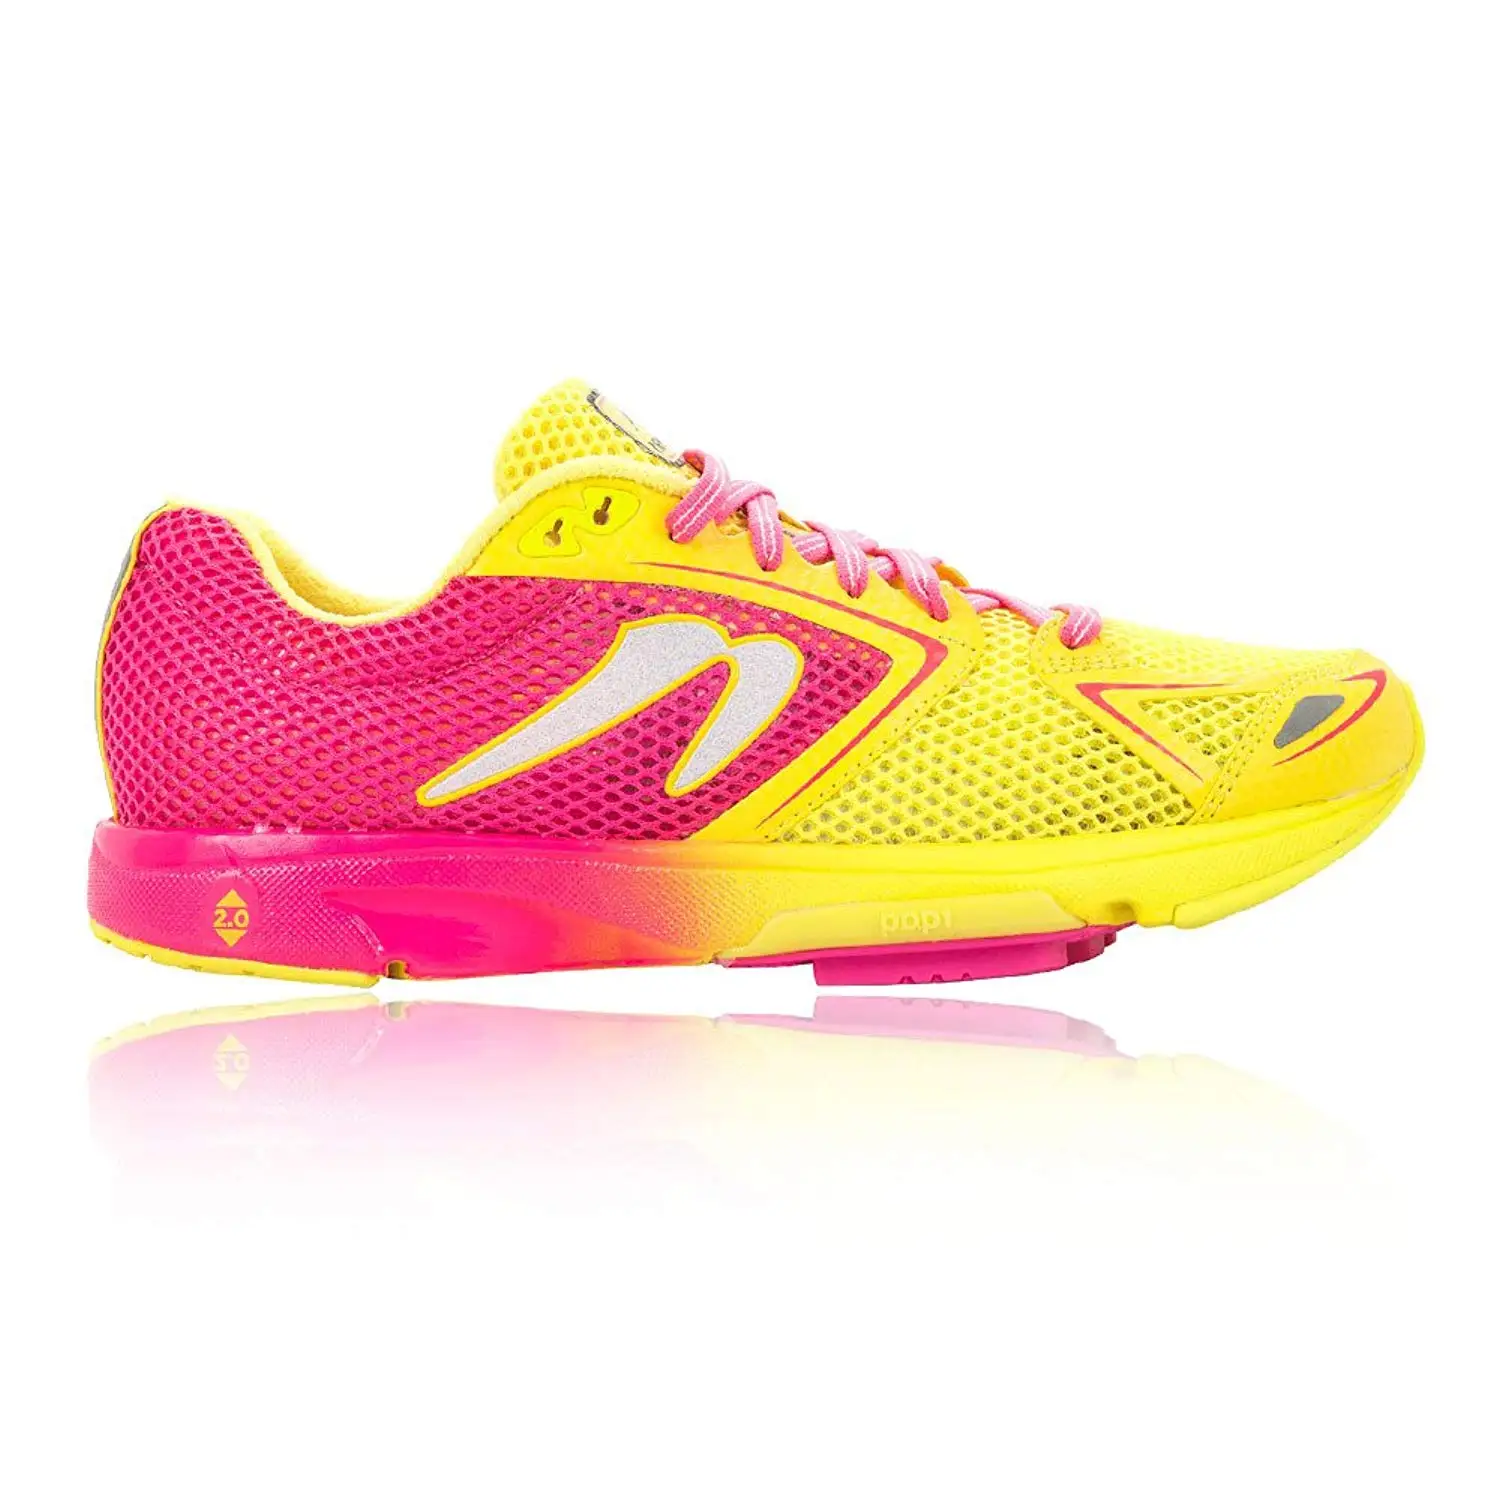 Cheap Newton Running Shoes Sale, find 